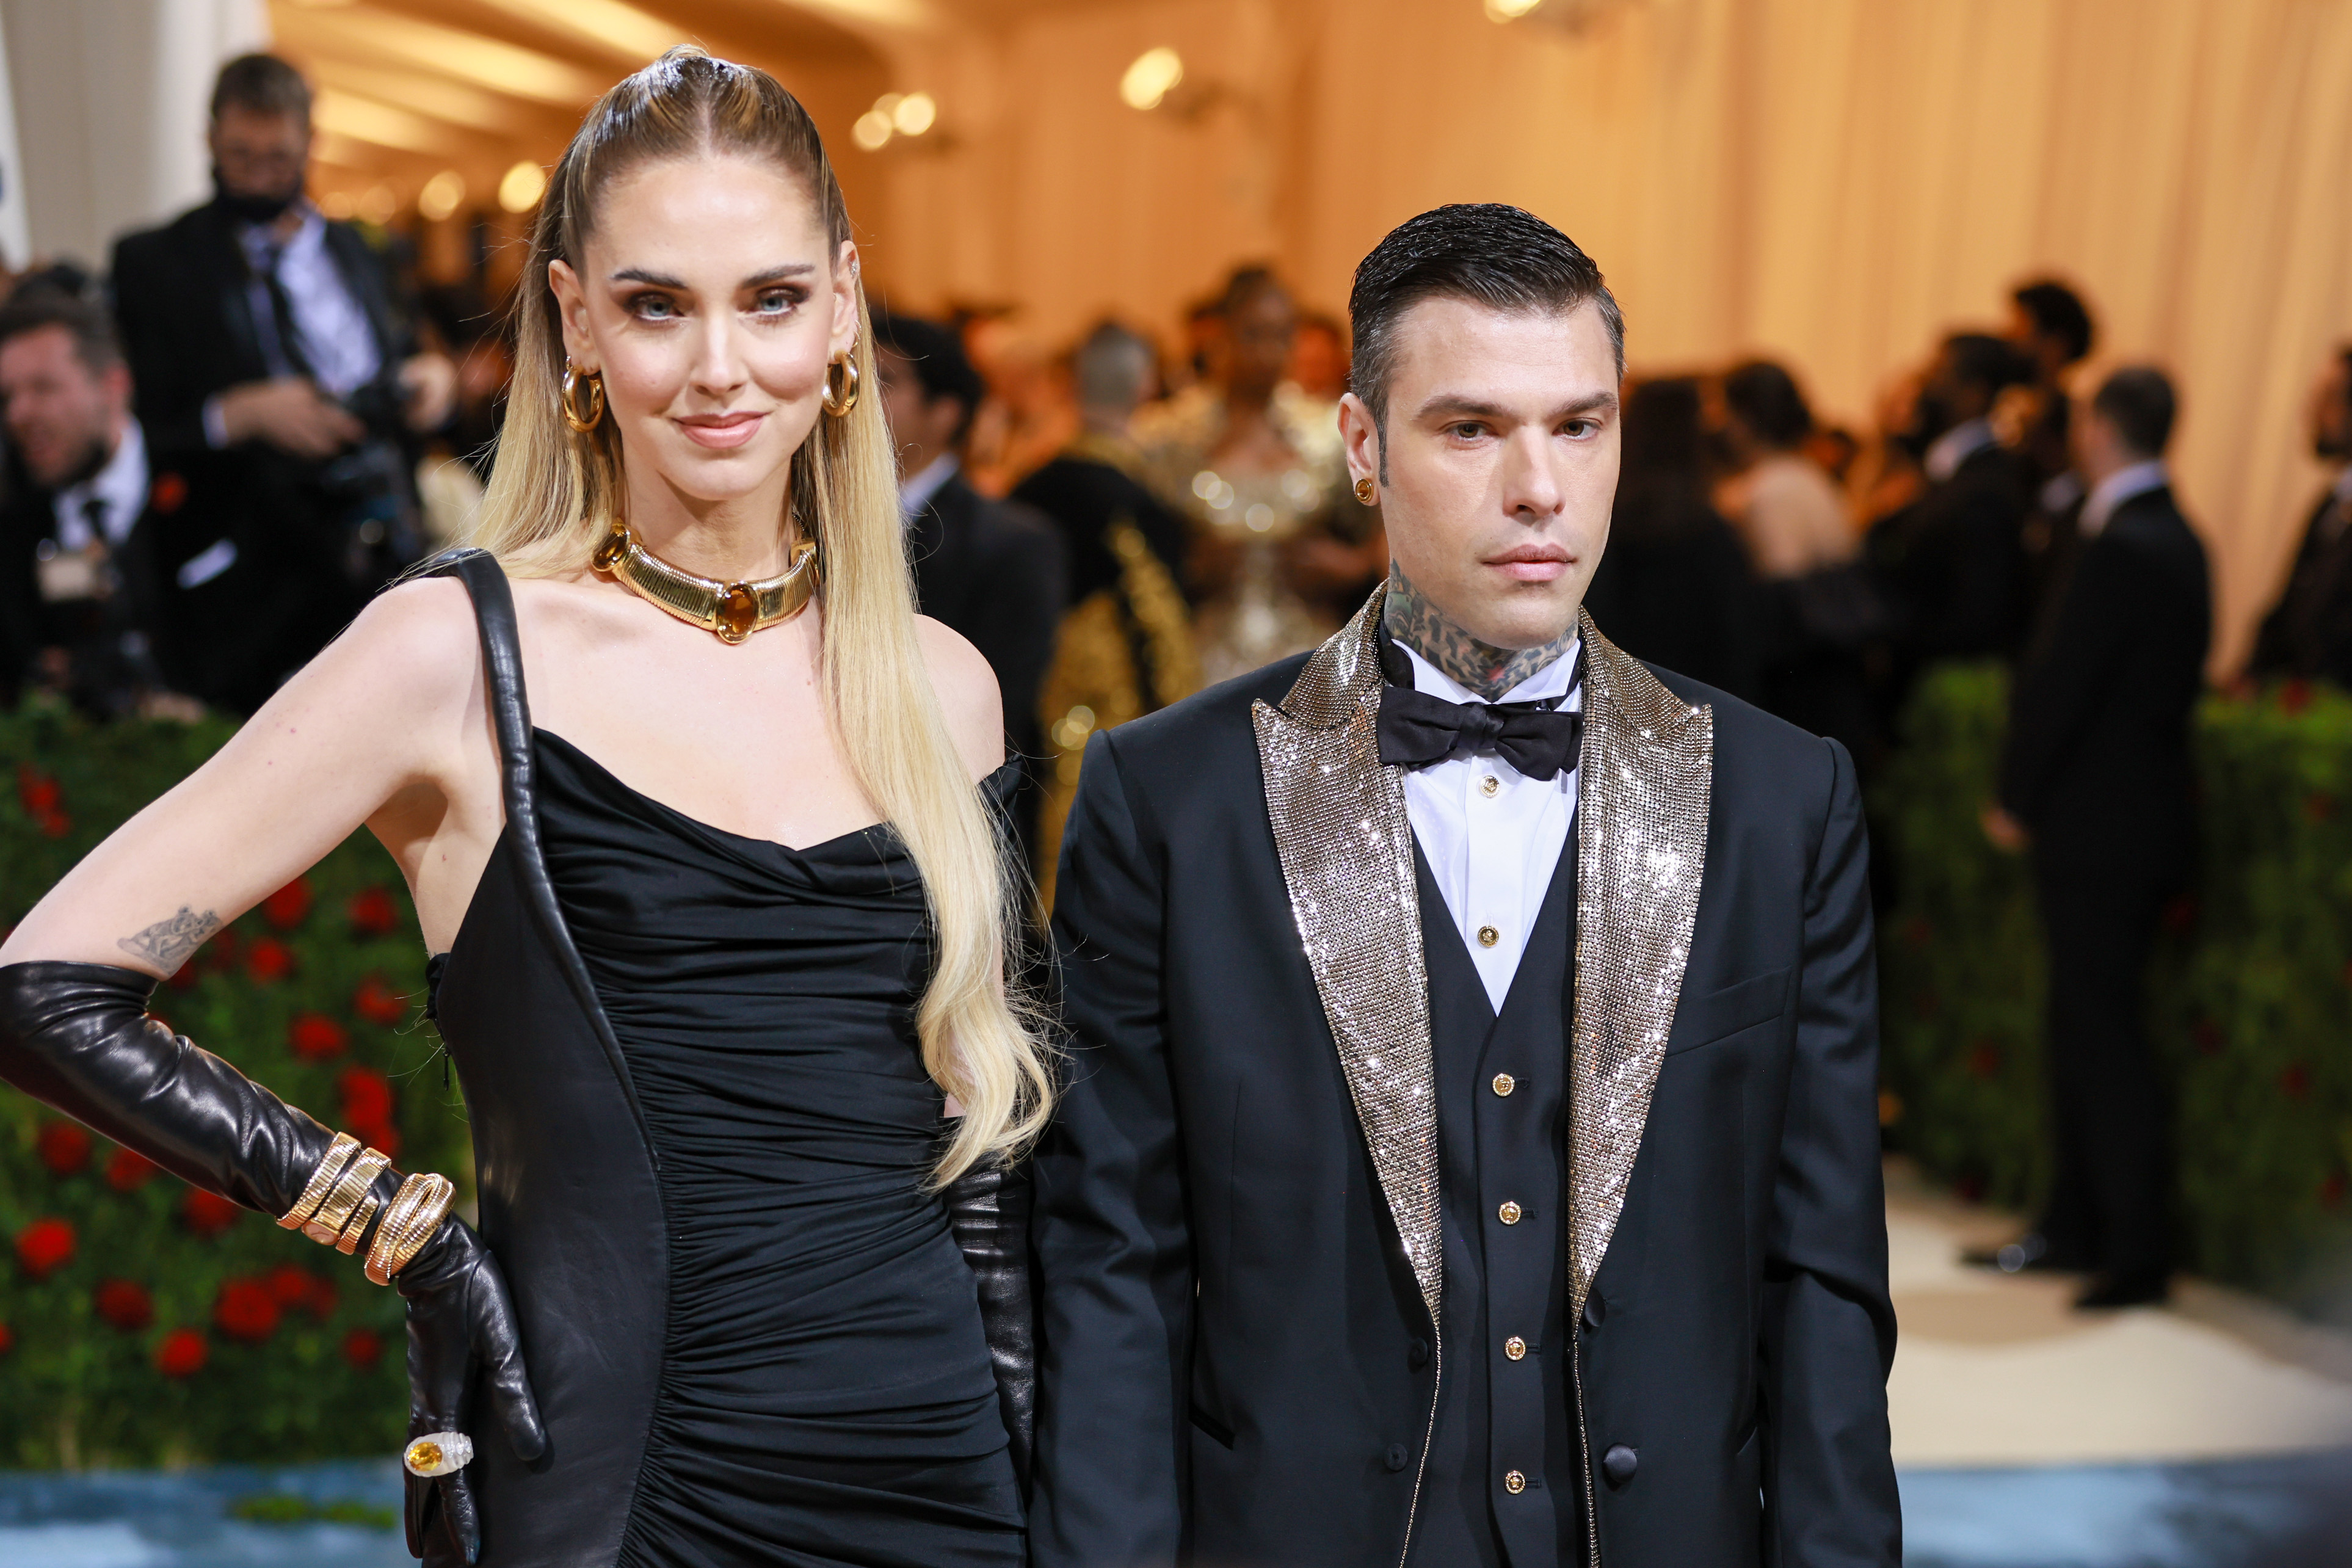 Chiara Ferragni and Fedez at The 2022 Met Gala on May 2, 2022, in New York City. | Source: Getty Images